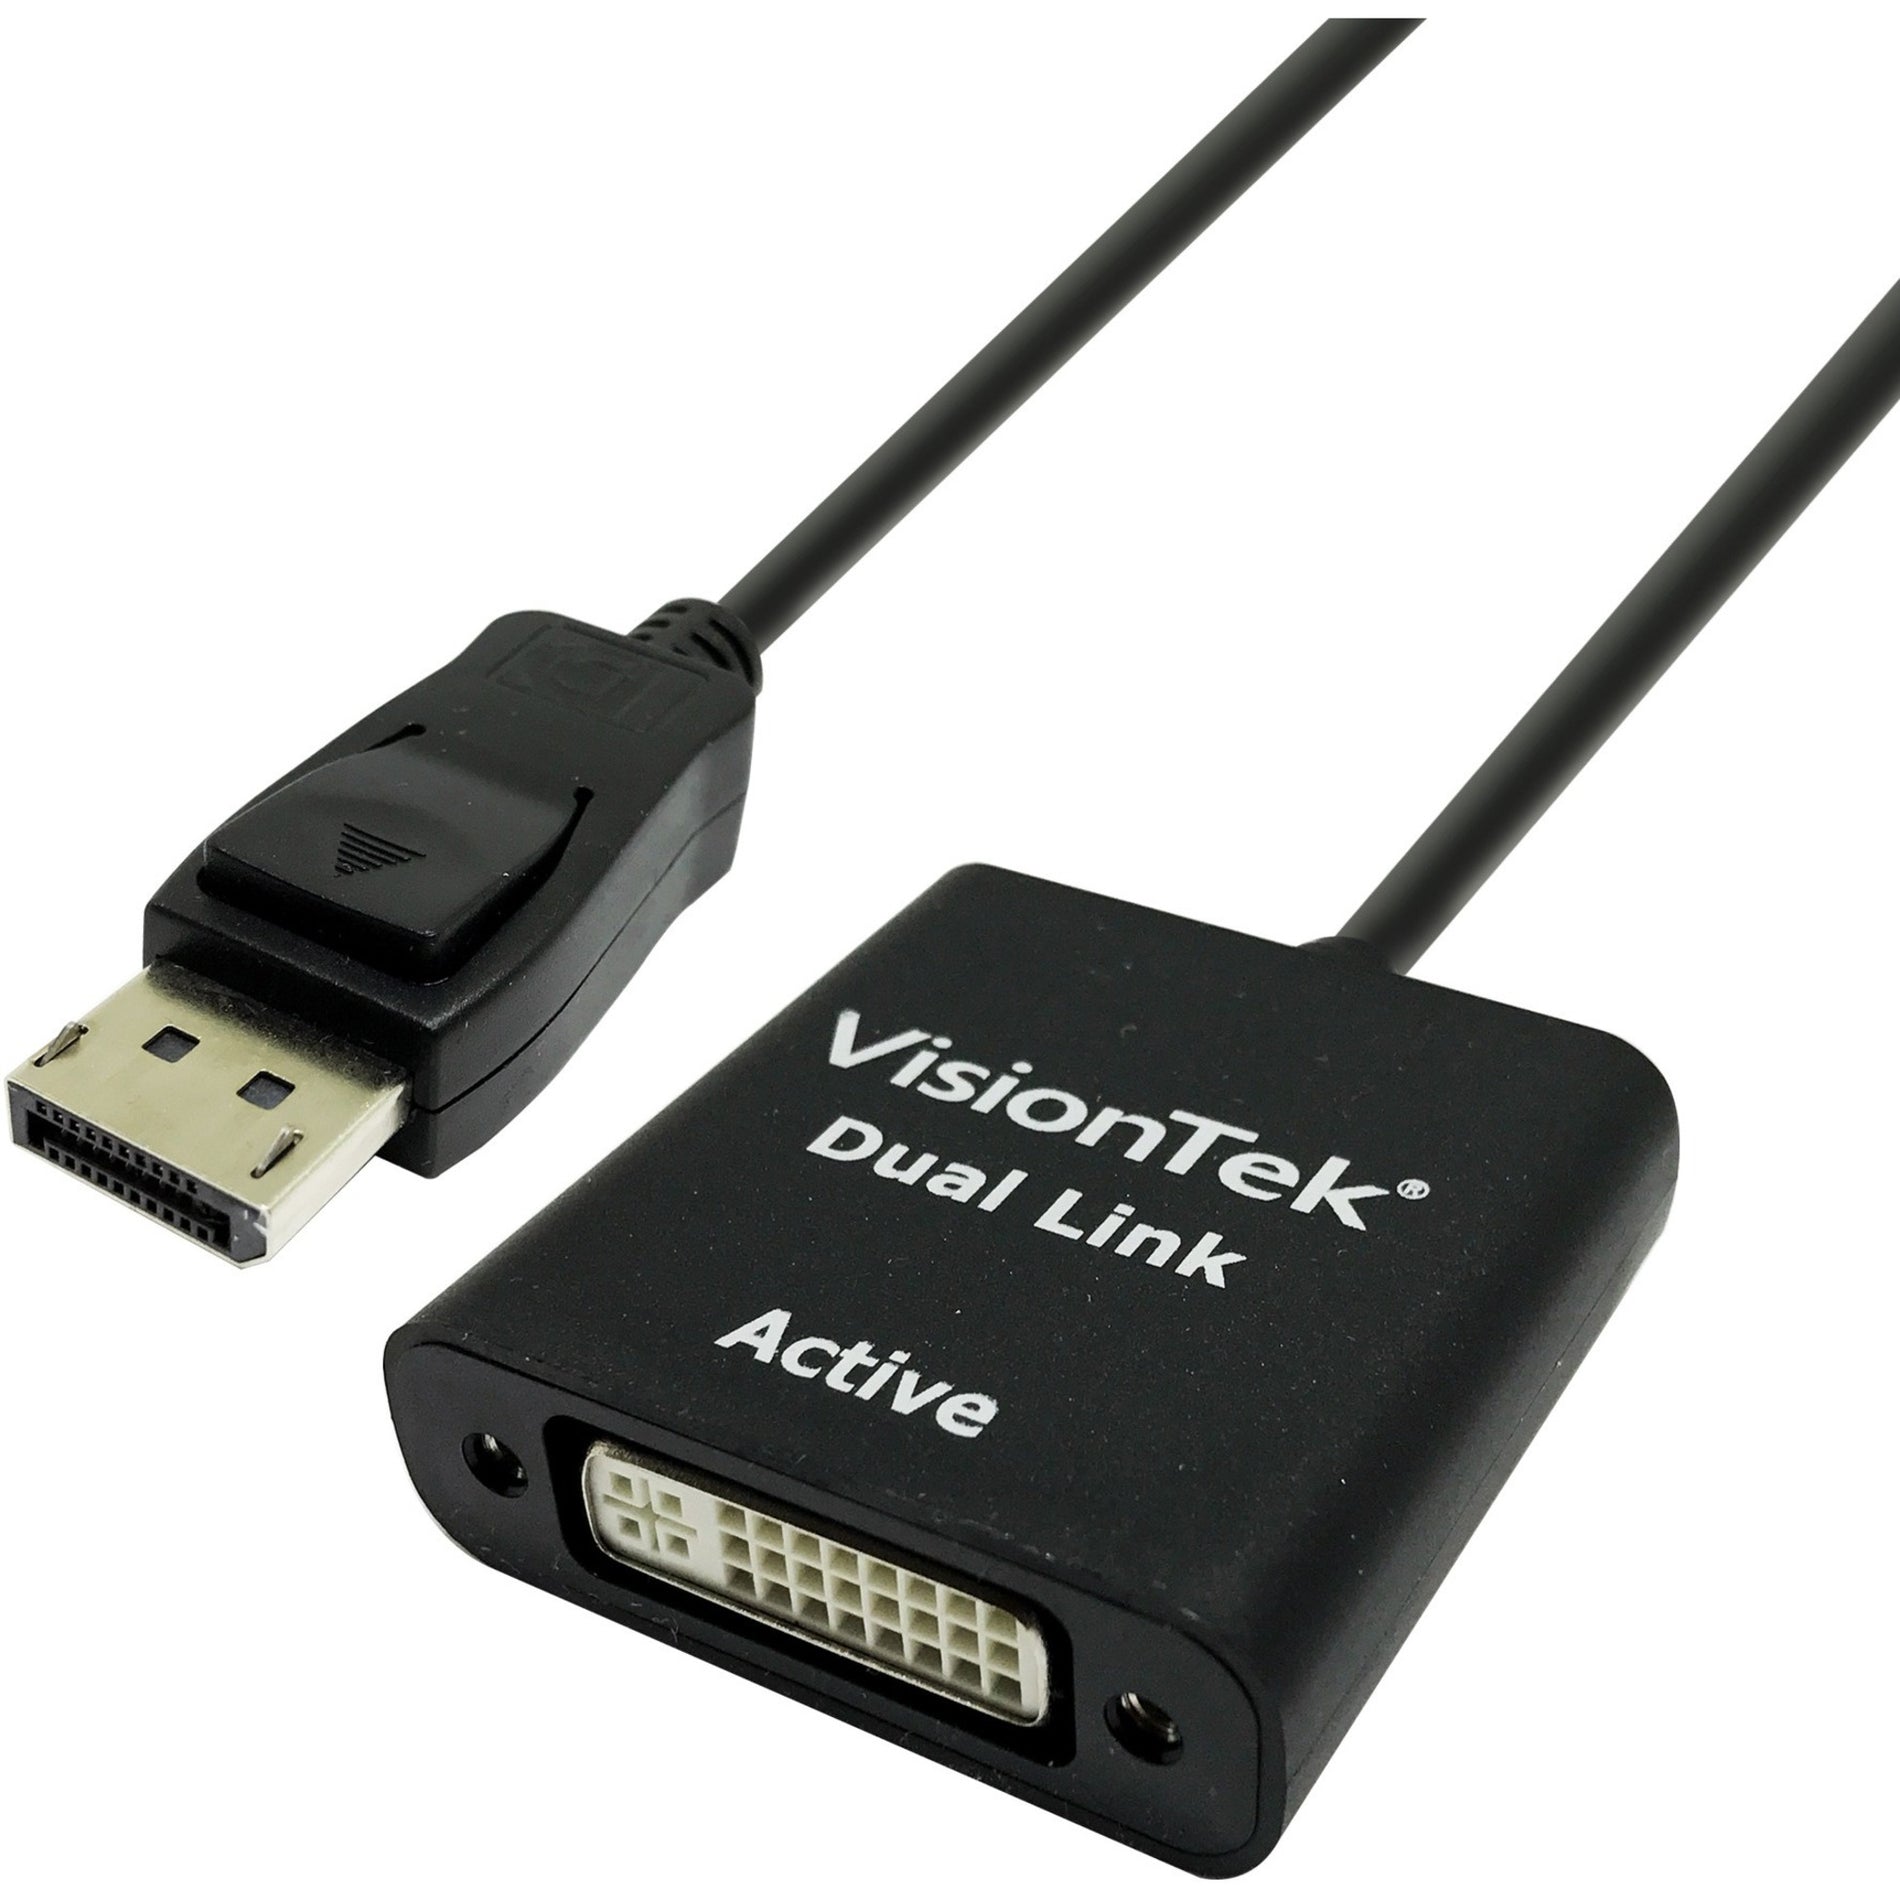 VisionTek 900639 DisplayPort to DL DVI-D Active Adapter Cable, Plug & Play, Eyefinity Technology